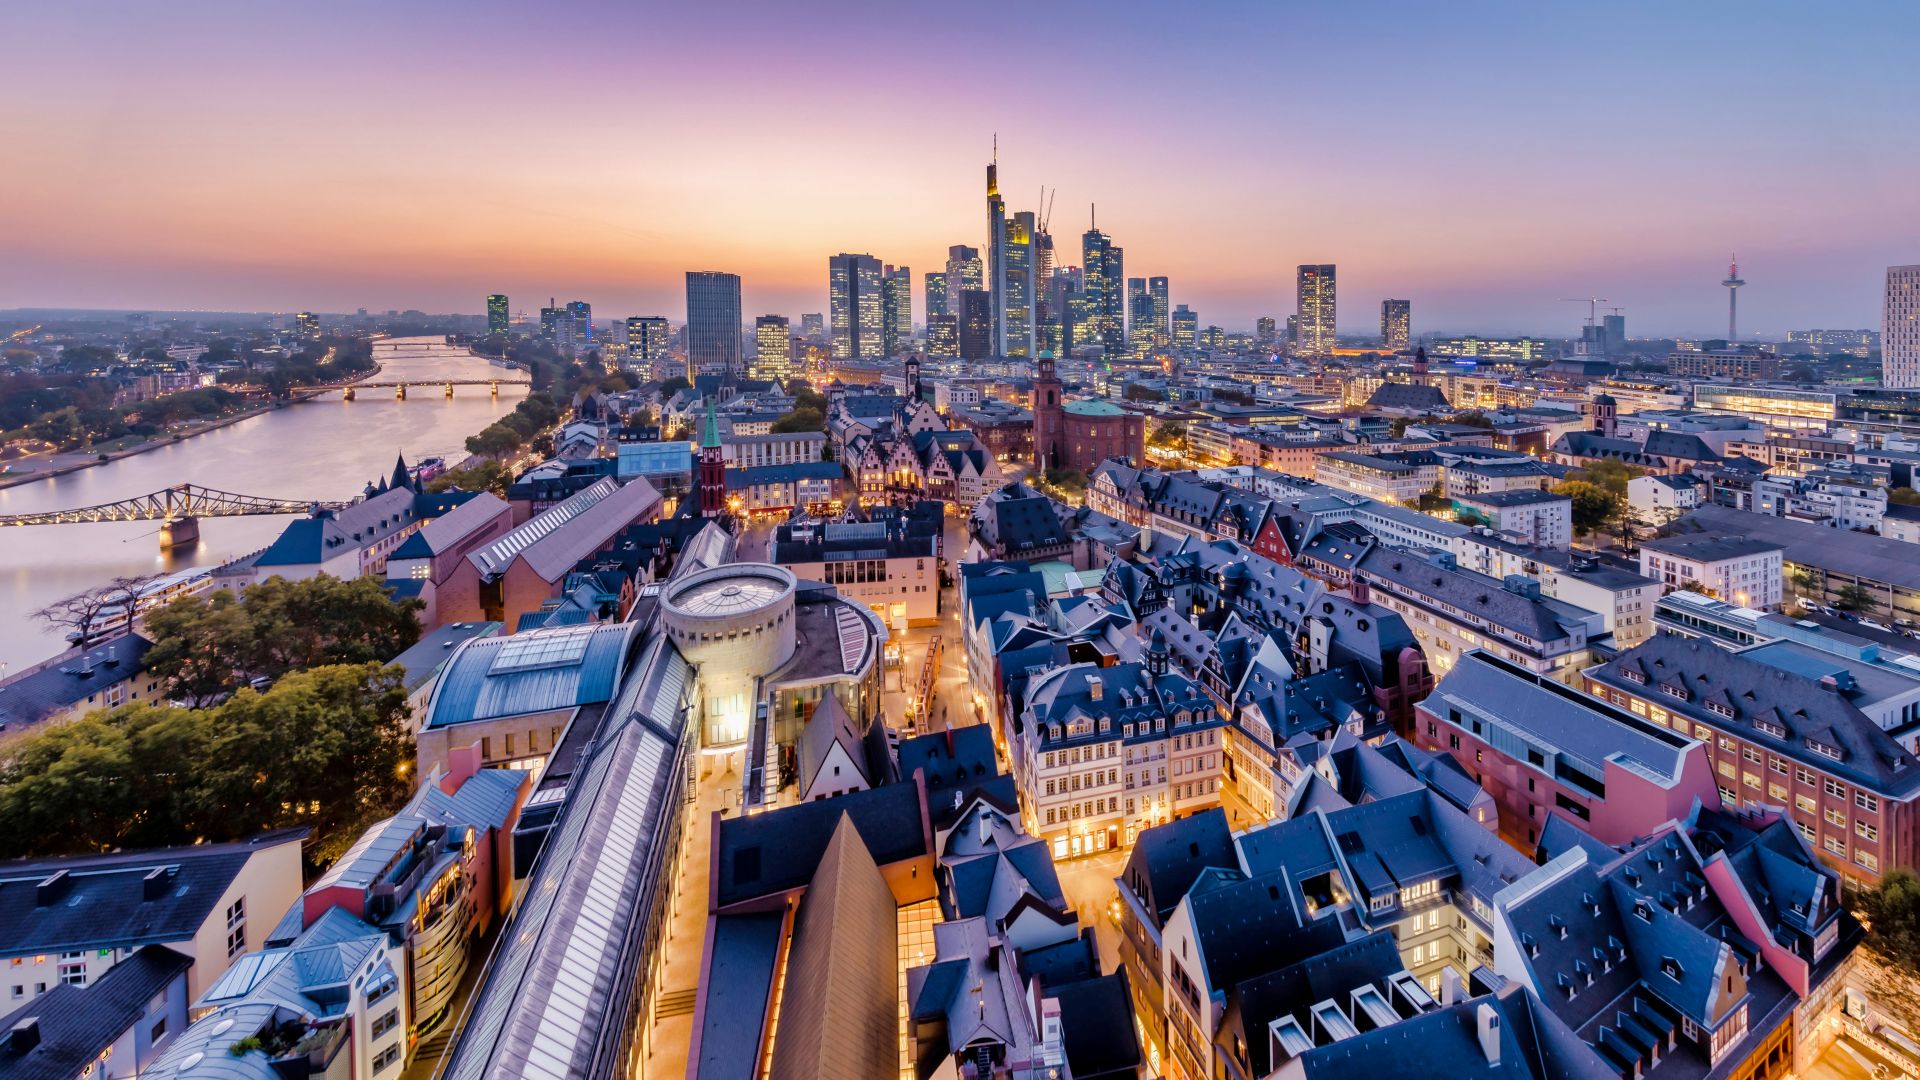 Frankfurt am Main: Skyline at sunset from the cathedral